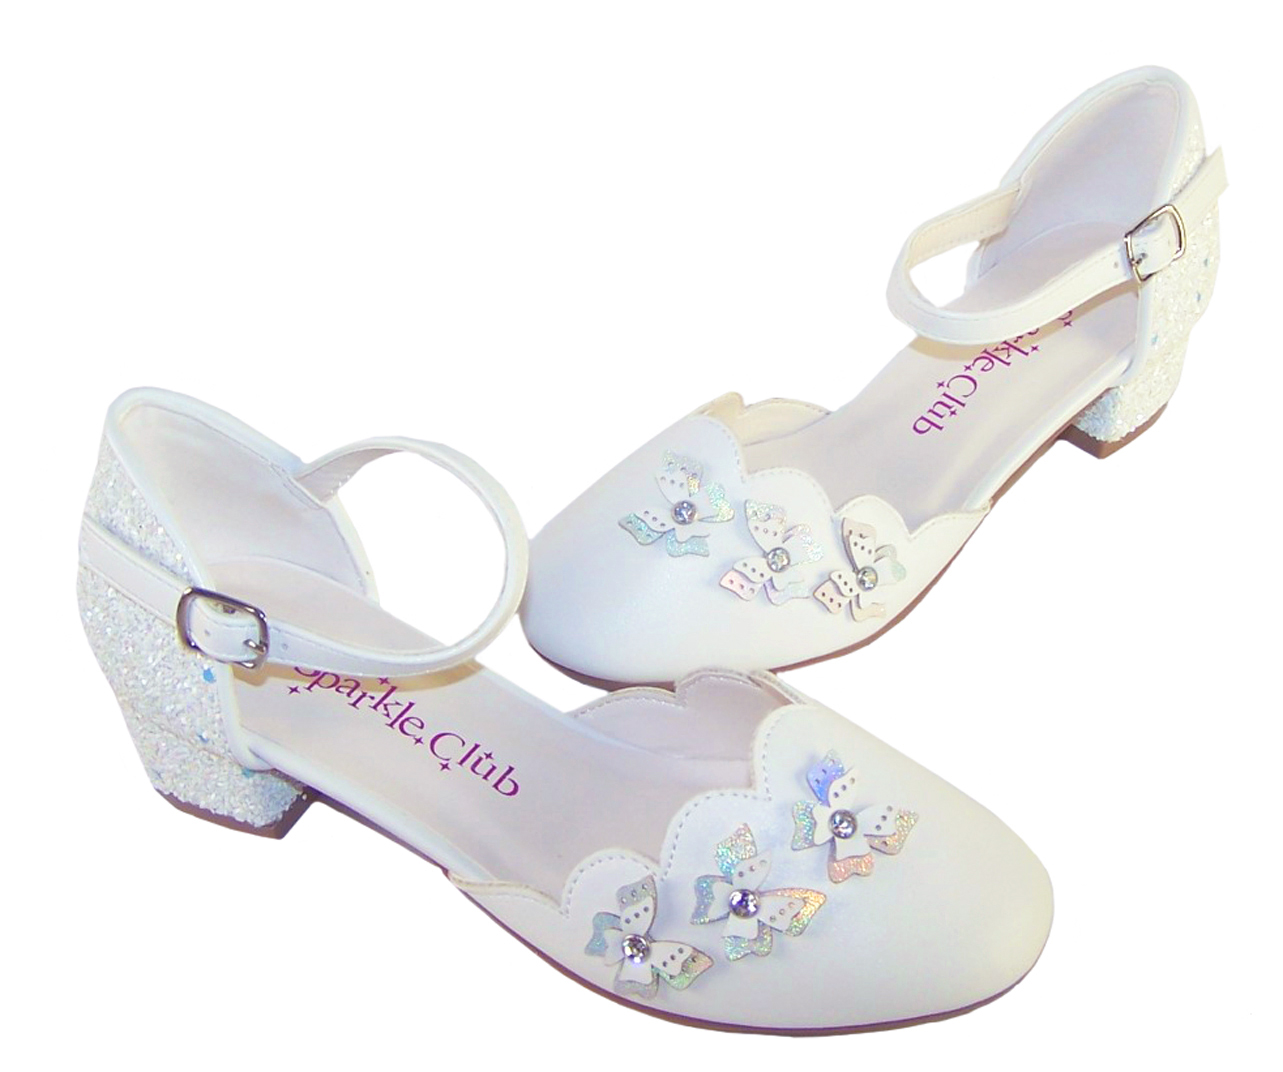 Girls white low heeled sparkly bridesmaid shoes-6423